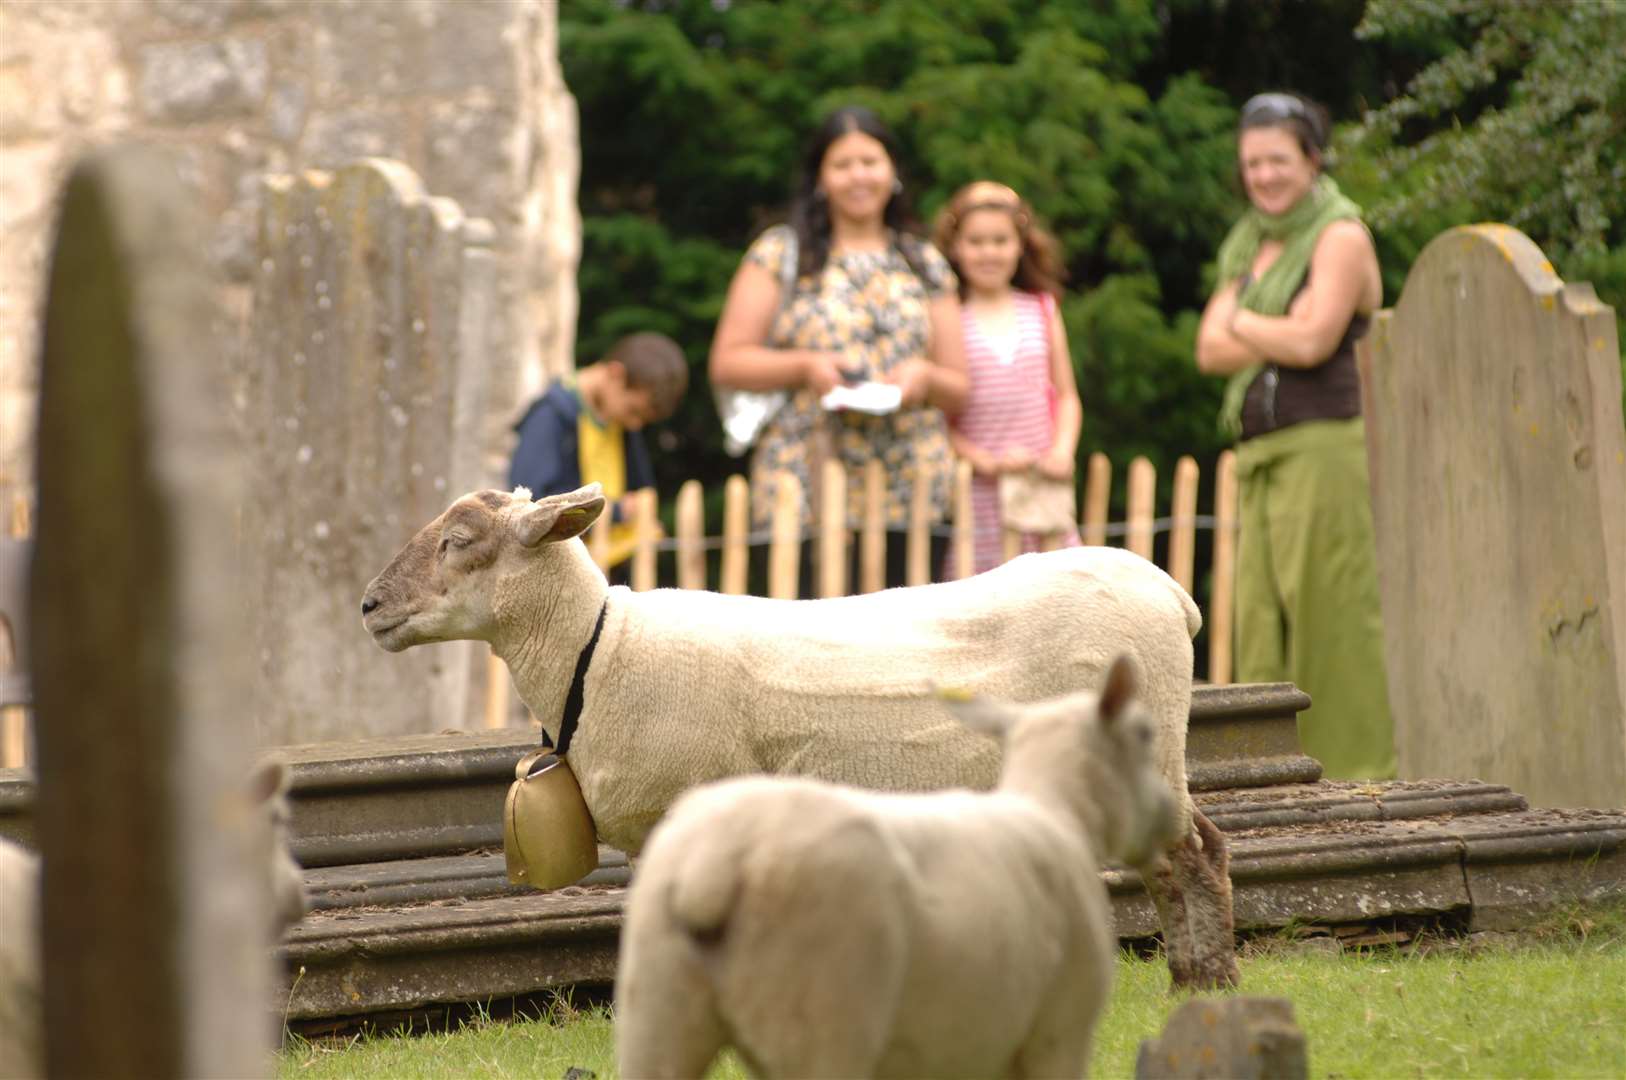 Lost O art installation came to Ashford... 10 sheep wore bells as they grazed in the churchyard during the event